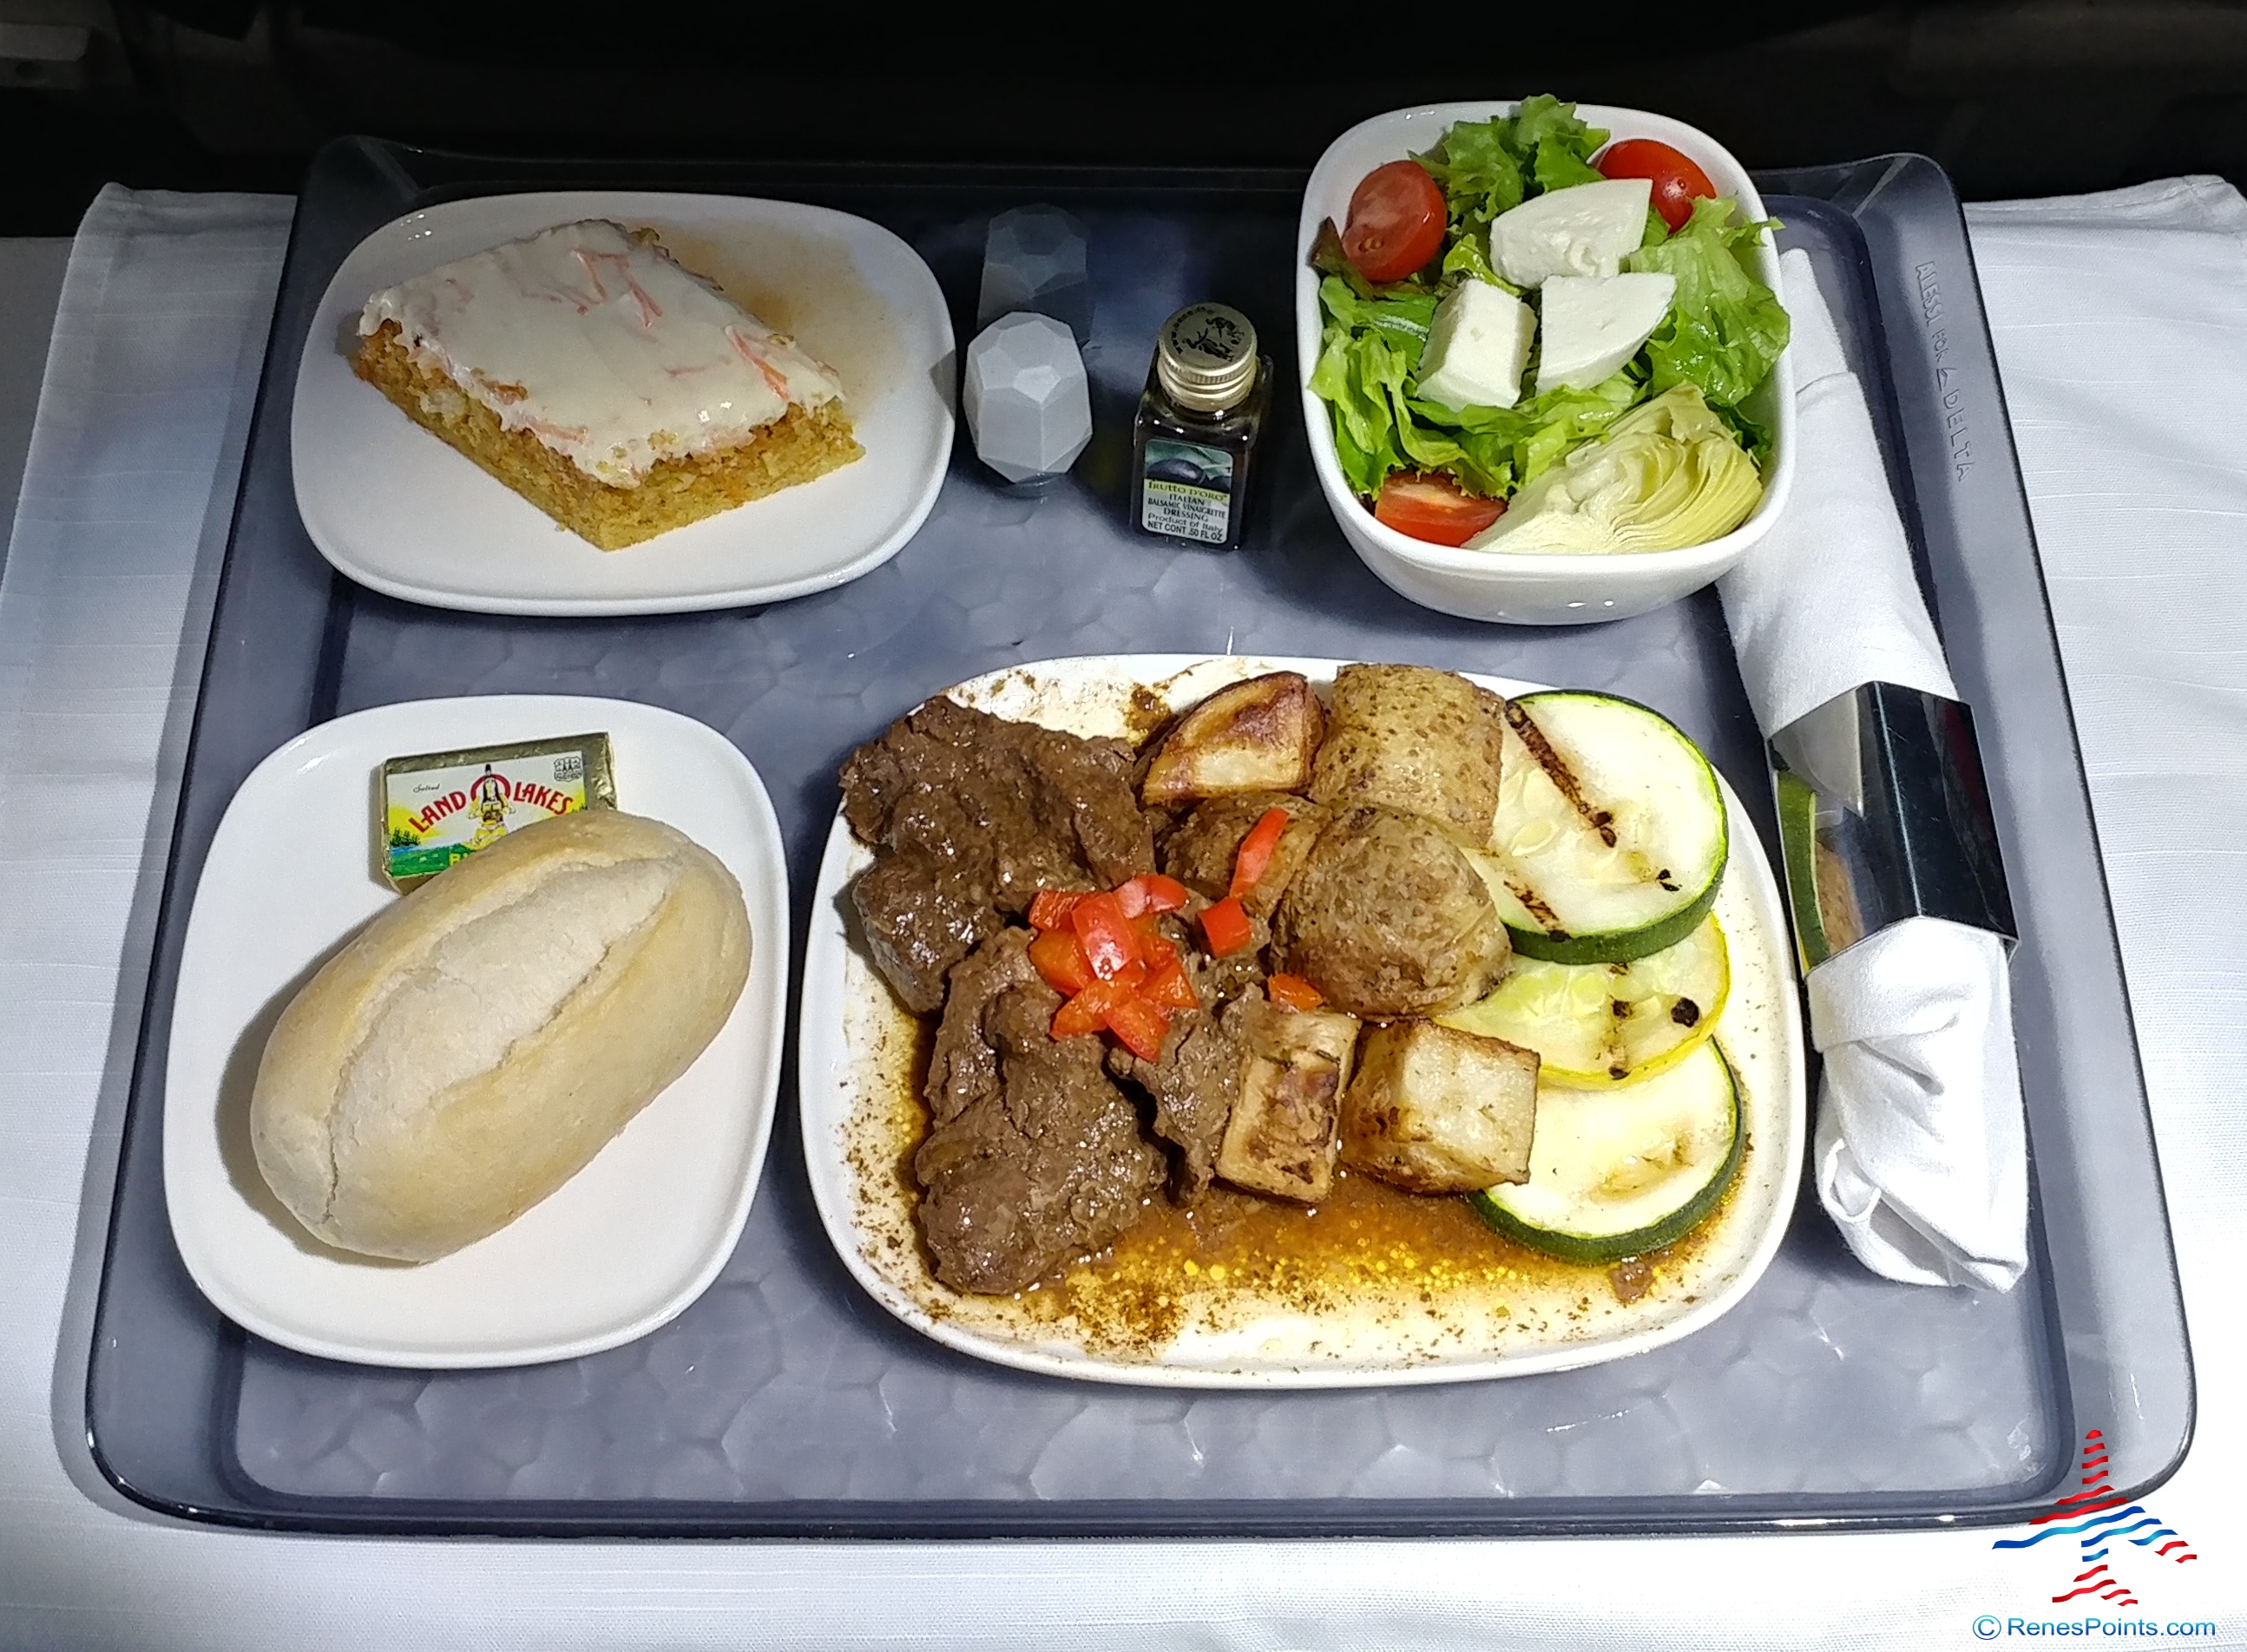 Delta Food Options And Information For Your Next Flight, 47 OFF